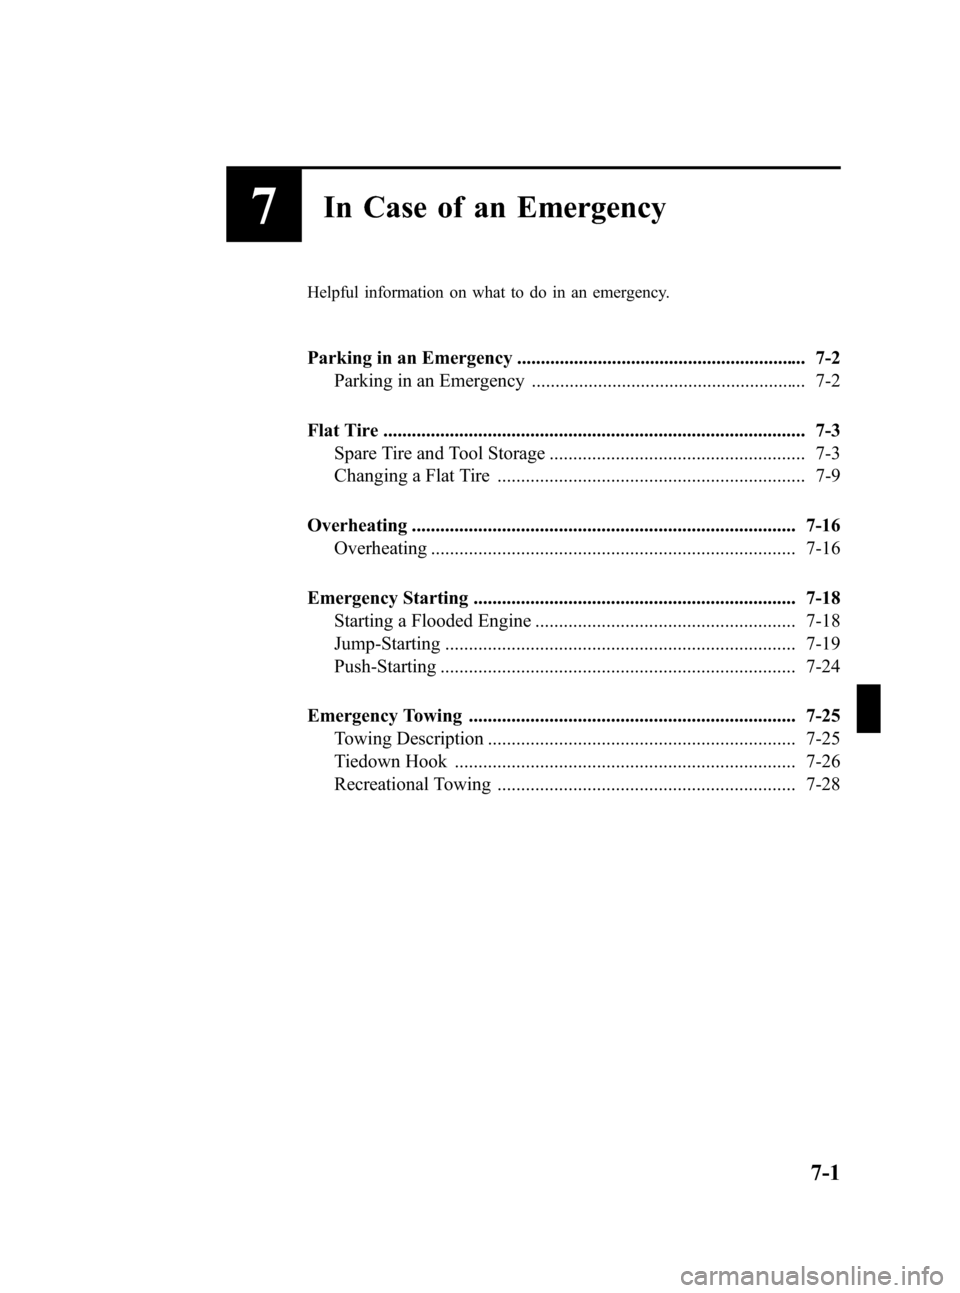 MAZDA MODEL 3 HATCHBACK 2012  Owners Manual (in English) Black plate (355,1)
7In Case of an Emergency
Helpful information on what to do in an emergency.
Parking in an Emergency ............................................................. 7-2Parking in an E